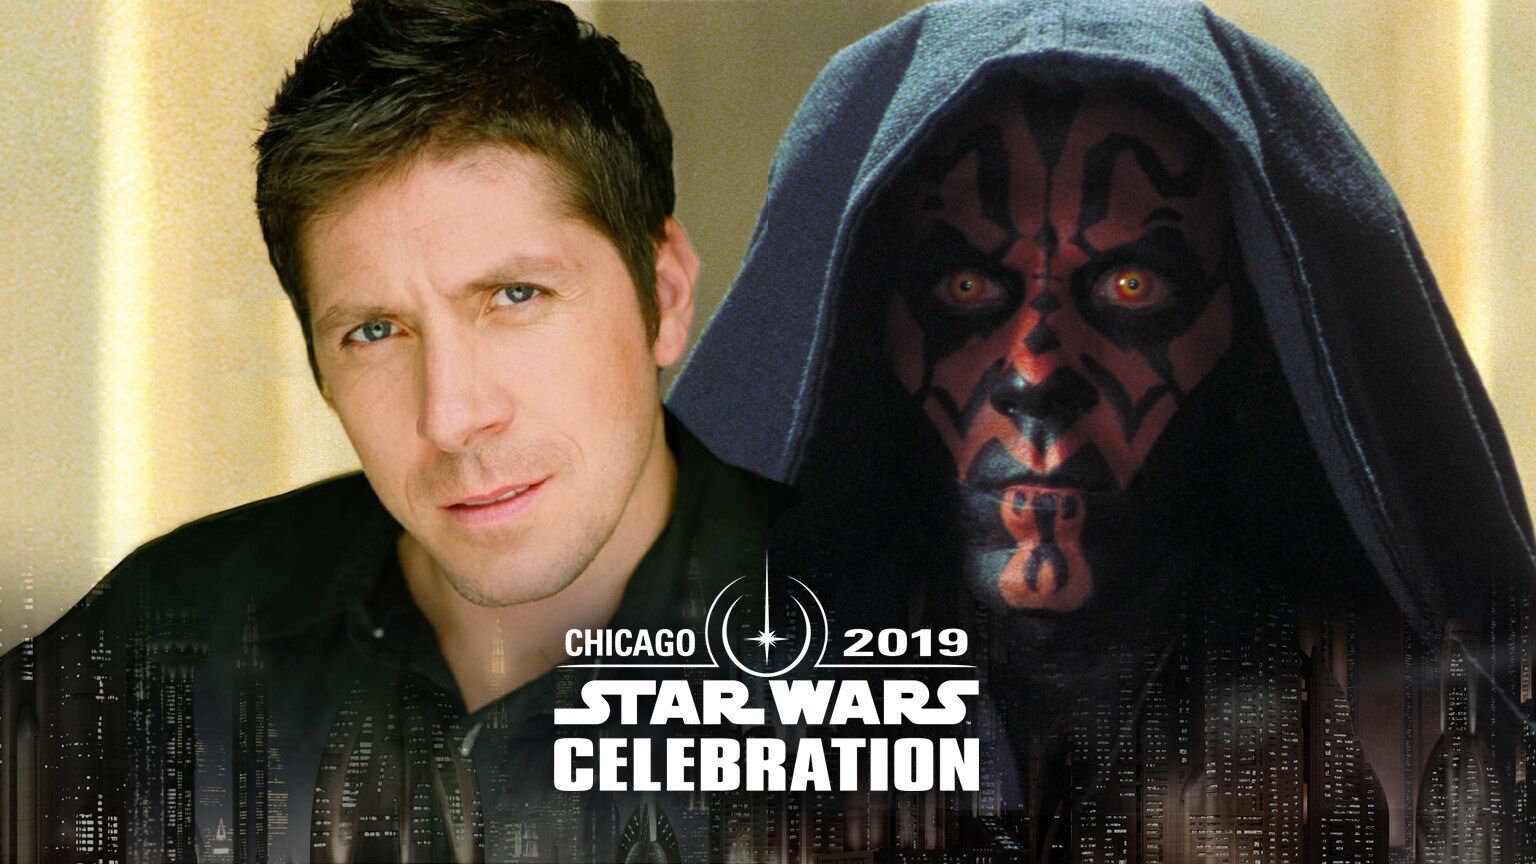 Ray Park, the Face of Maul, Announced for Star Wars Celebration Chicago